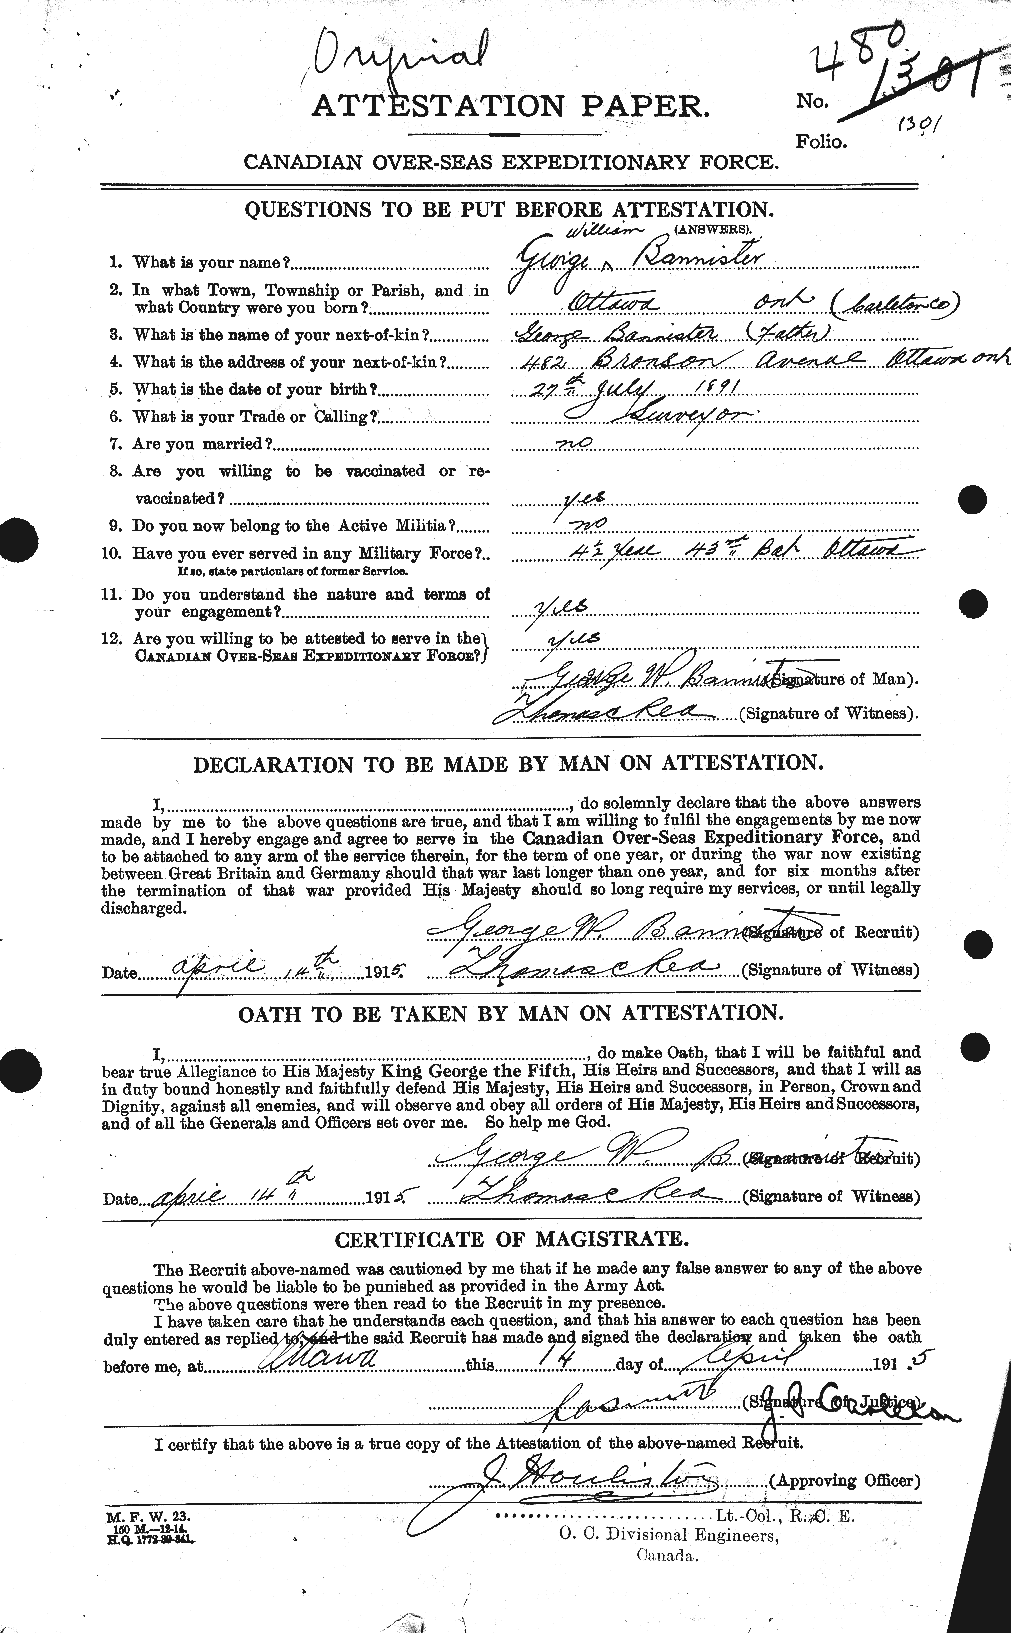 Personnel Records of the First World War - CEF 224795a